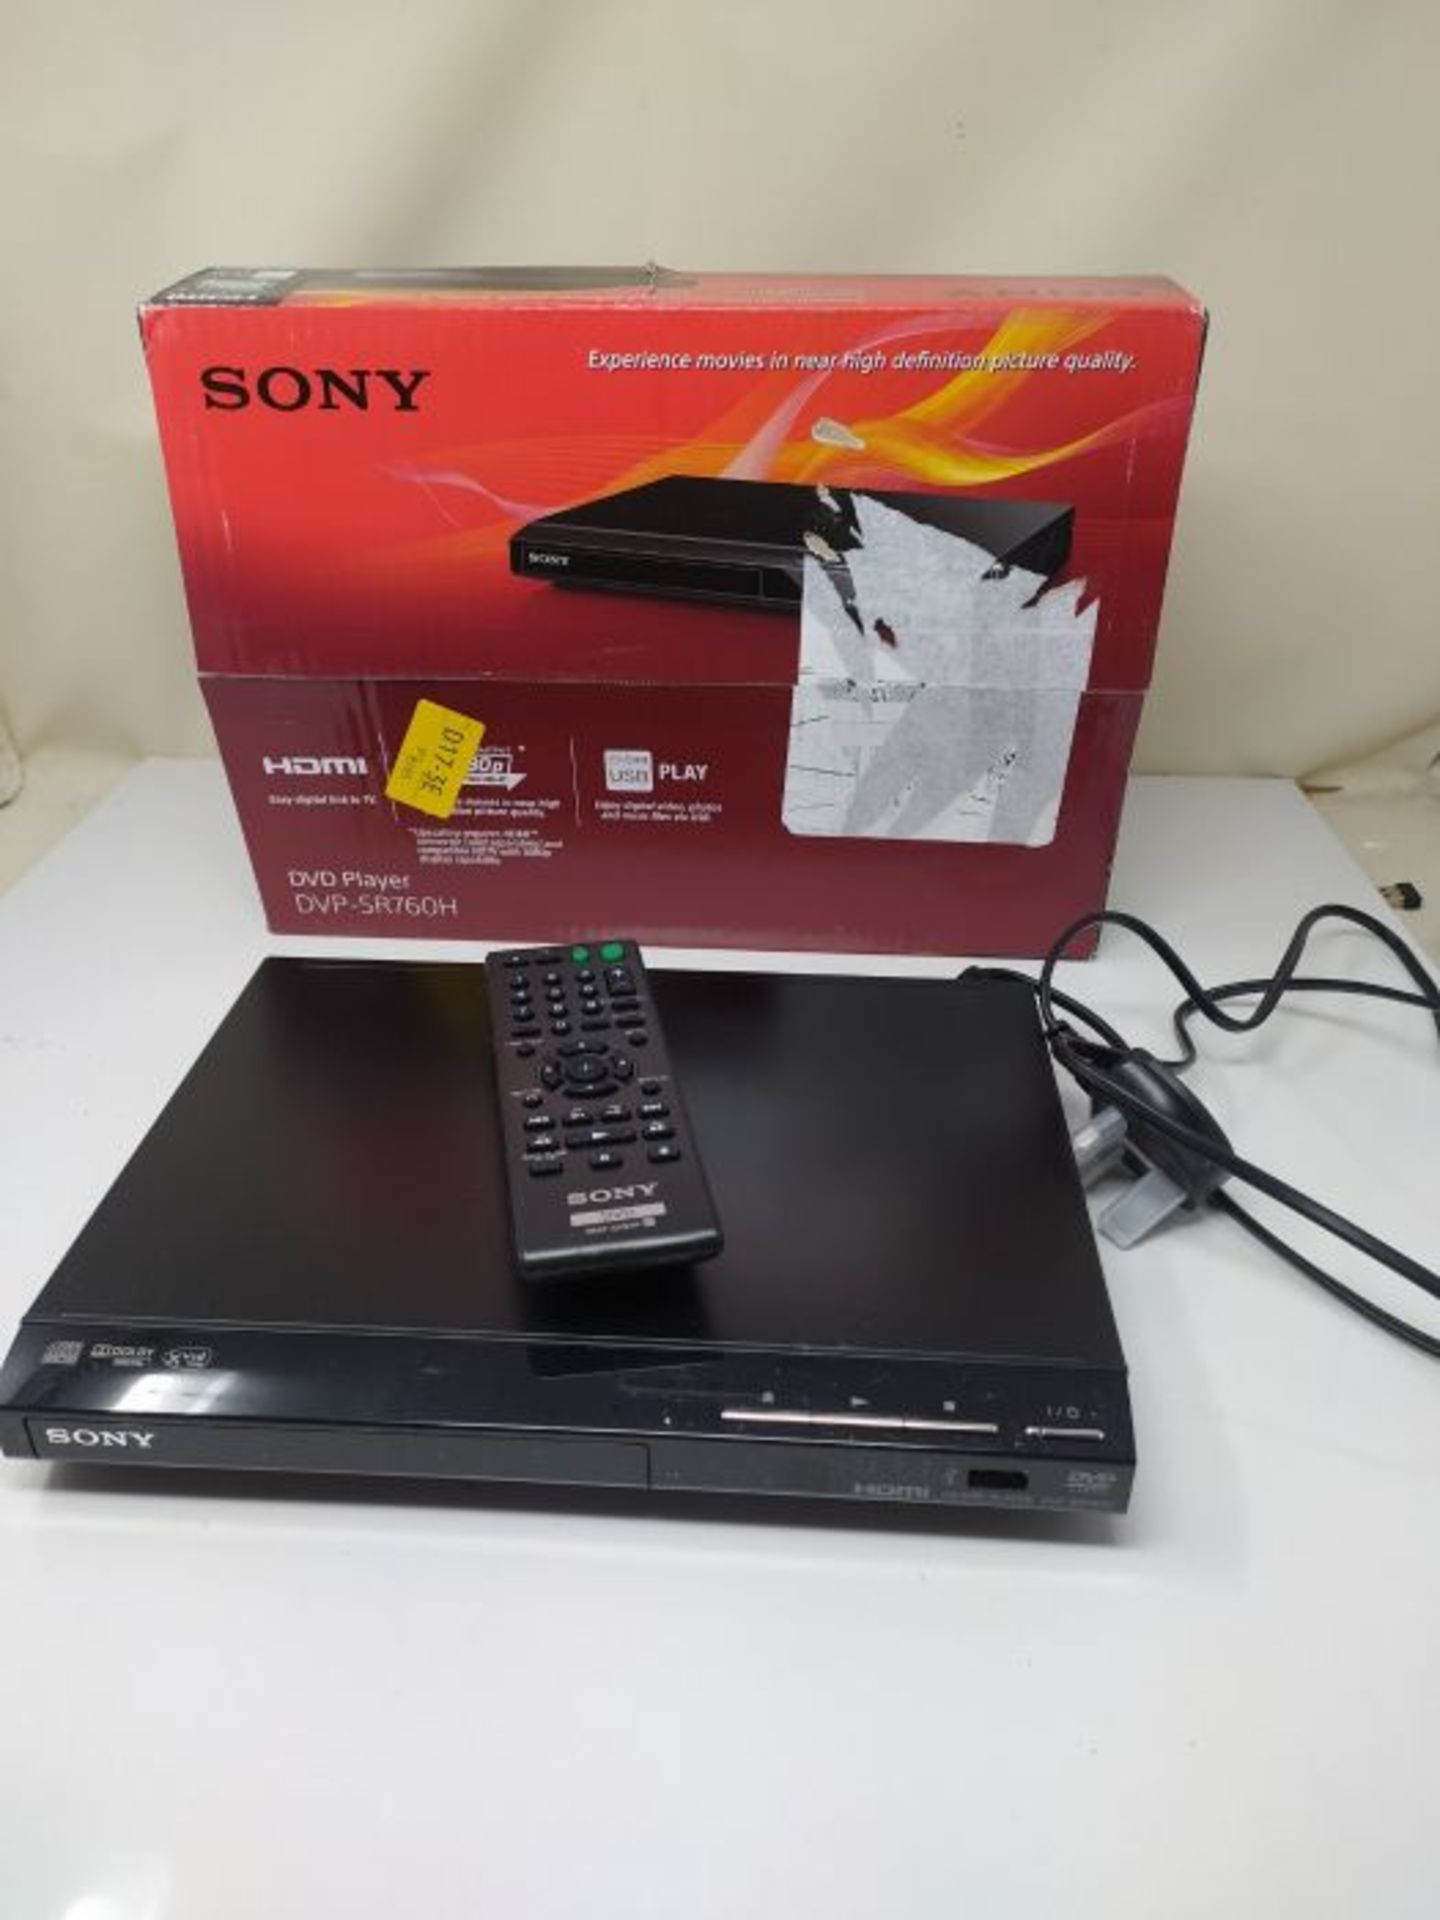 Sony DVPSR760H DVD Upgrade Player (HDMI, 1080 Pixel Upscaling, USB Connectivity), Blac - Image 2 of 2